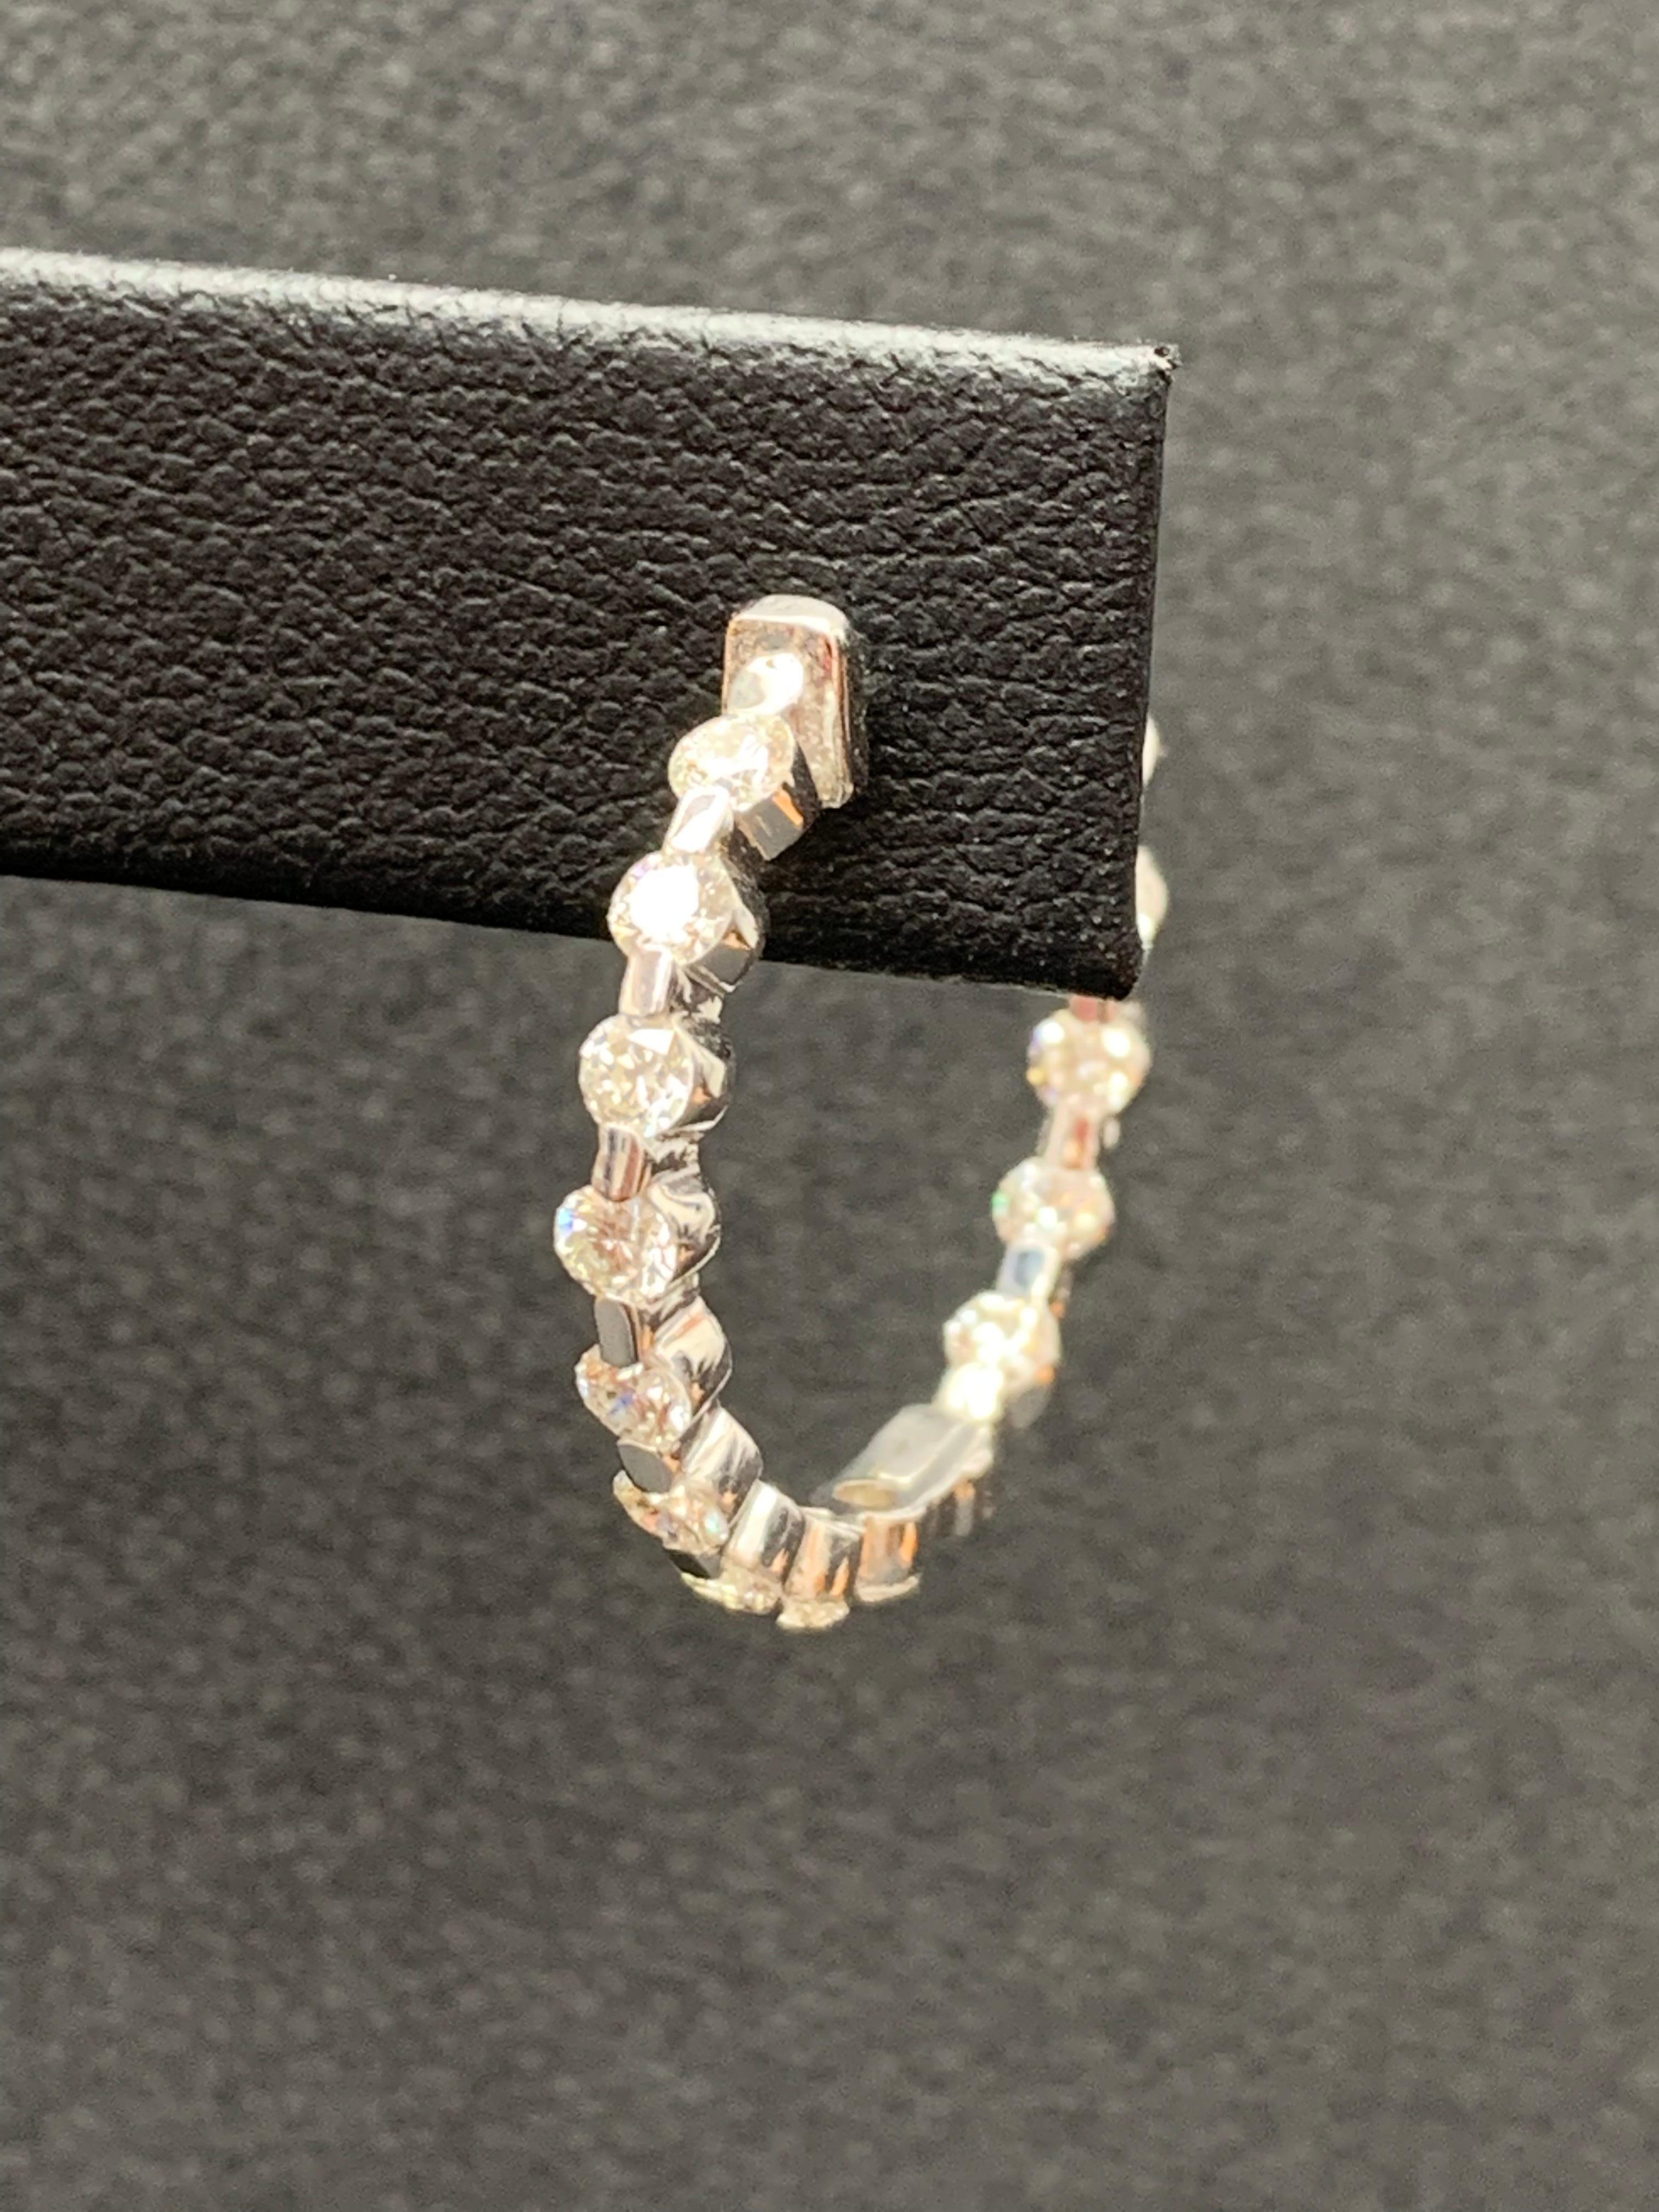 Gorgeous and classic diamond hoop earrings. Features dazzling round diamonds set in shared prongs to maximize the brilliance of the diamonds. The total weight of the 28 diamonds is 2.01 carats. Made in 14k white gold. Approximately 1.65 inches in